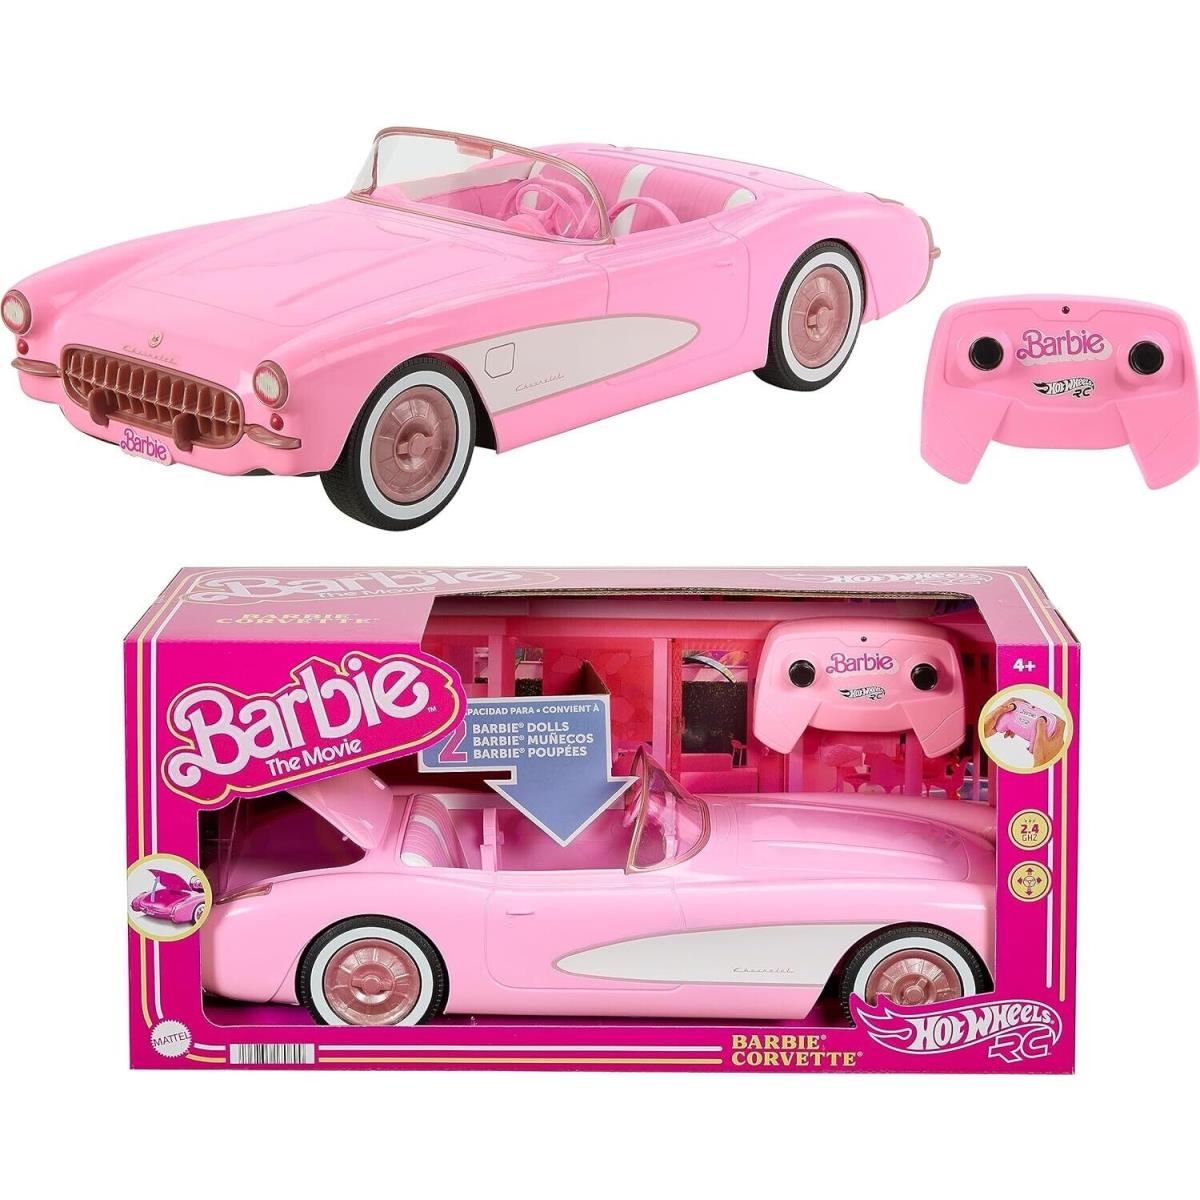 Hot Wheels RC Barbie 1956 Corvette Toy Car From Barbie The Movie